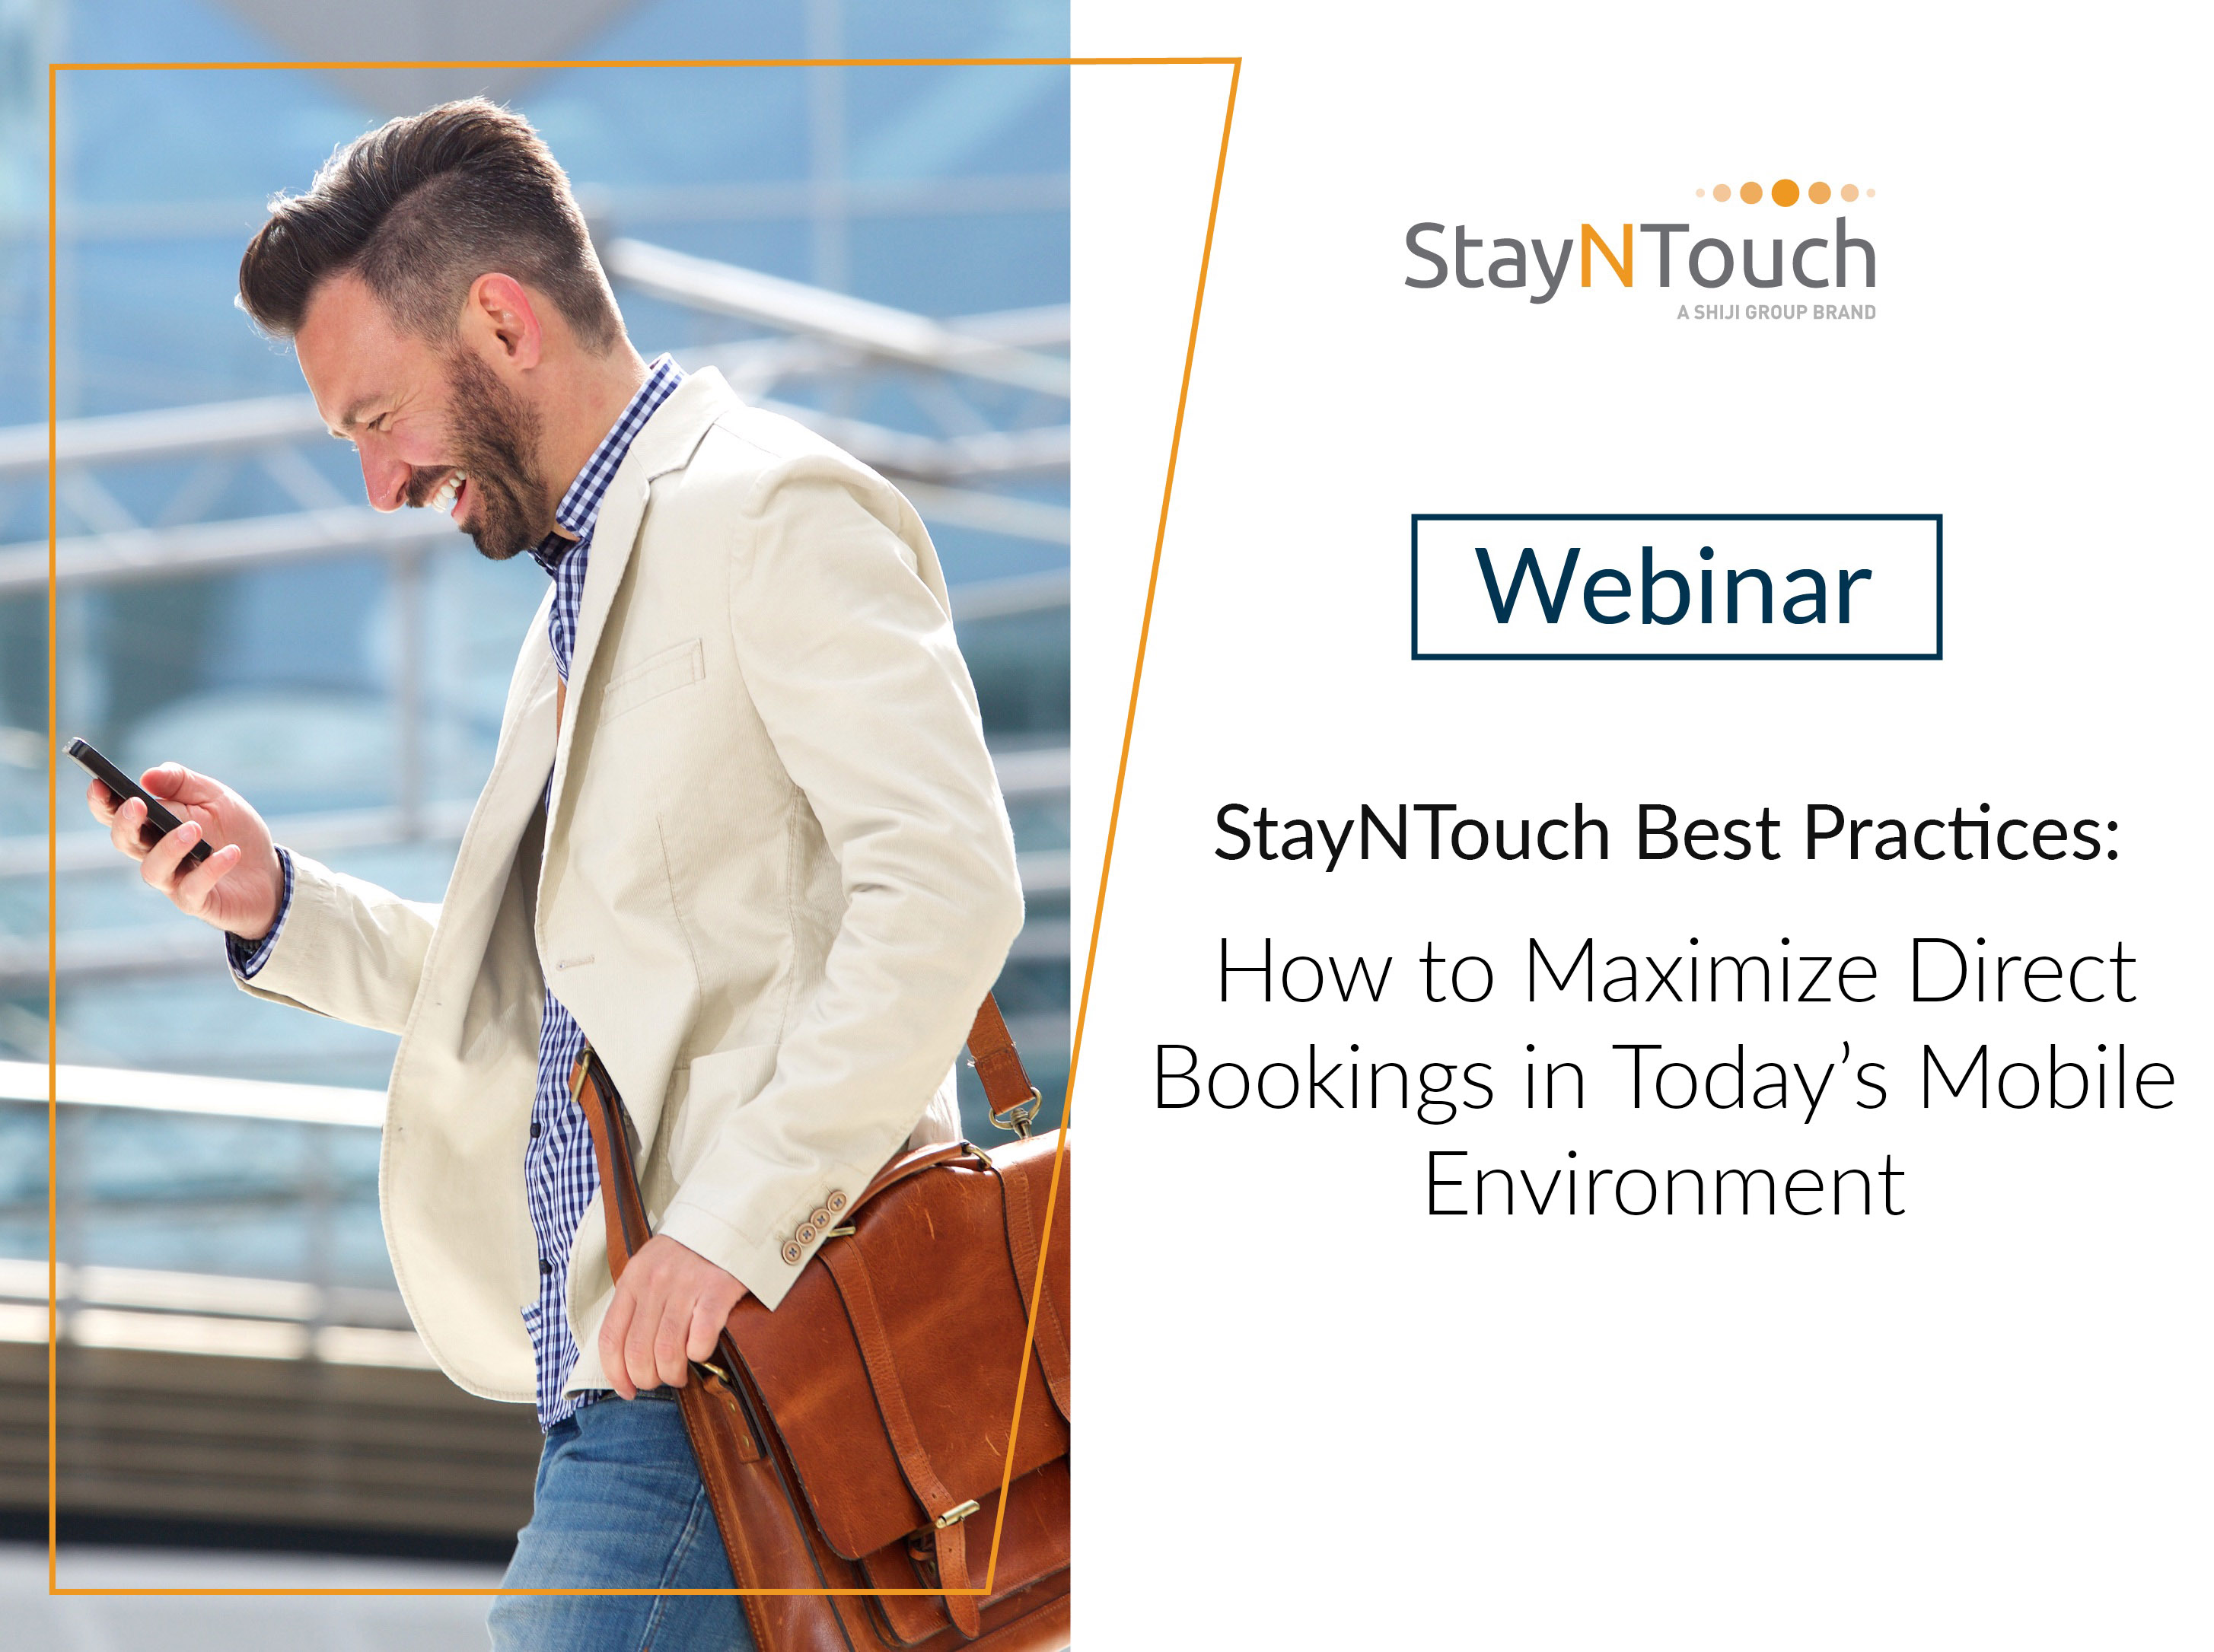 [Webinar] StayNTouch Best Practices: How to Maximize Direct Bookings in Today’s Mobile Environment